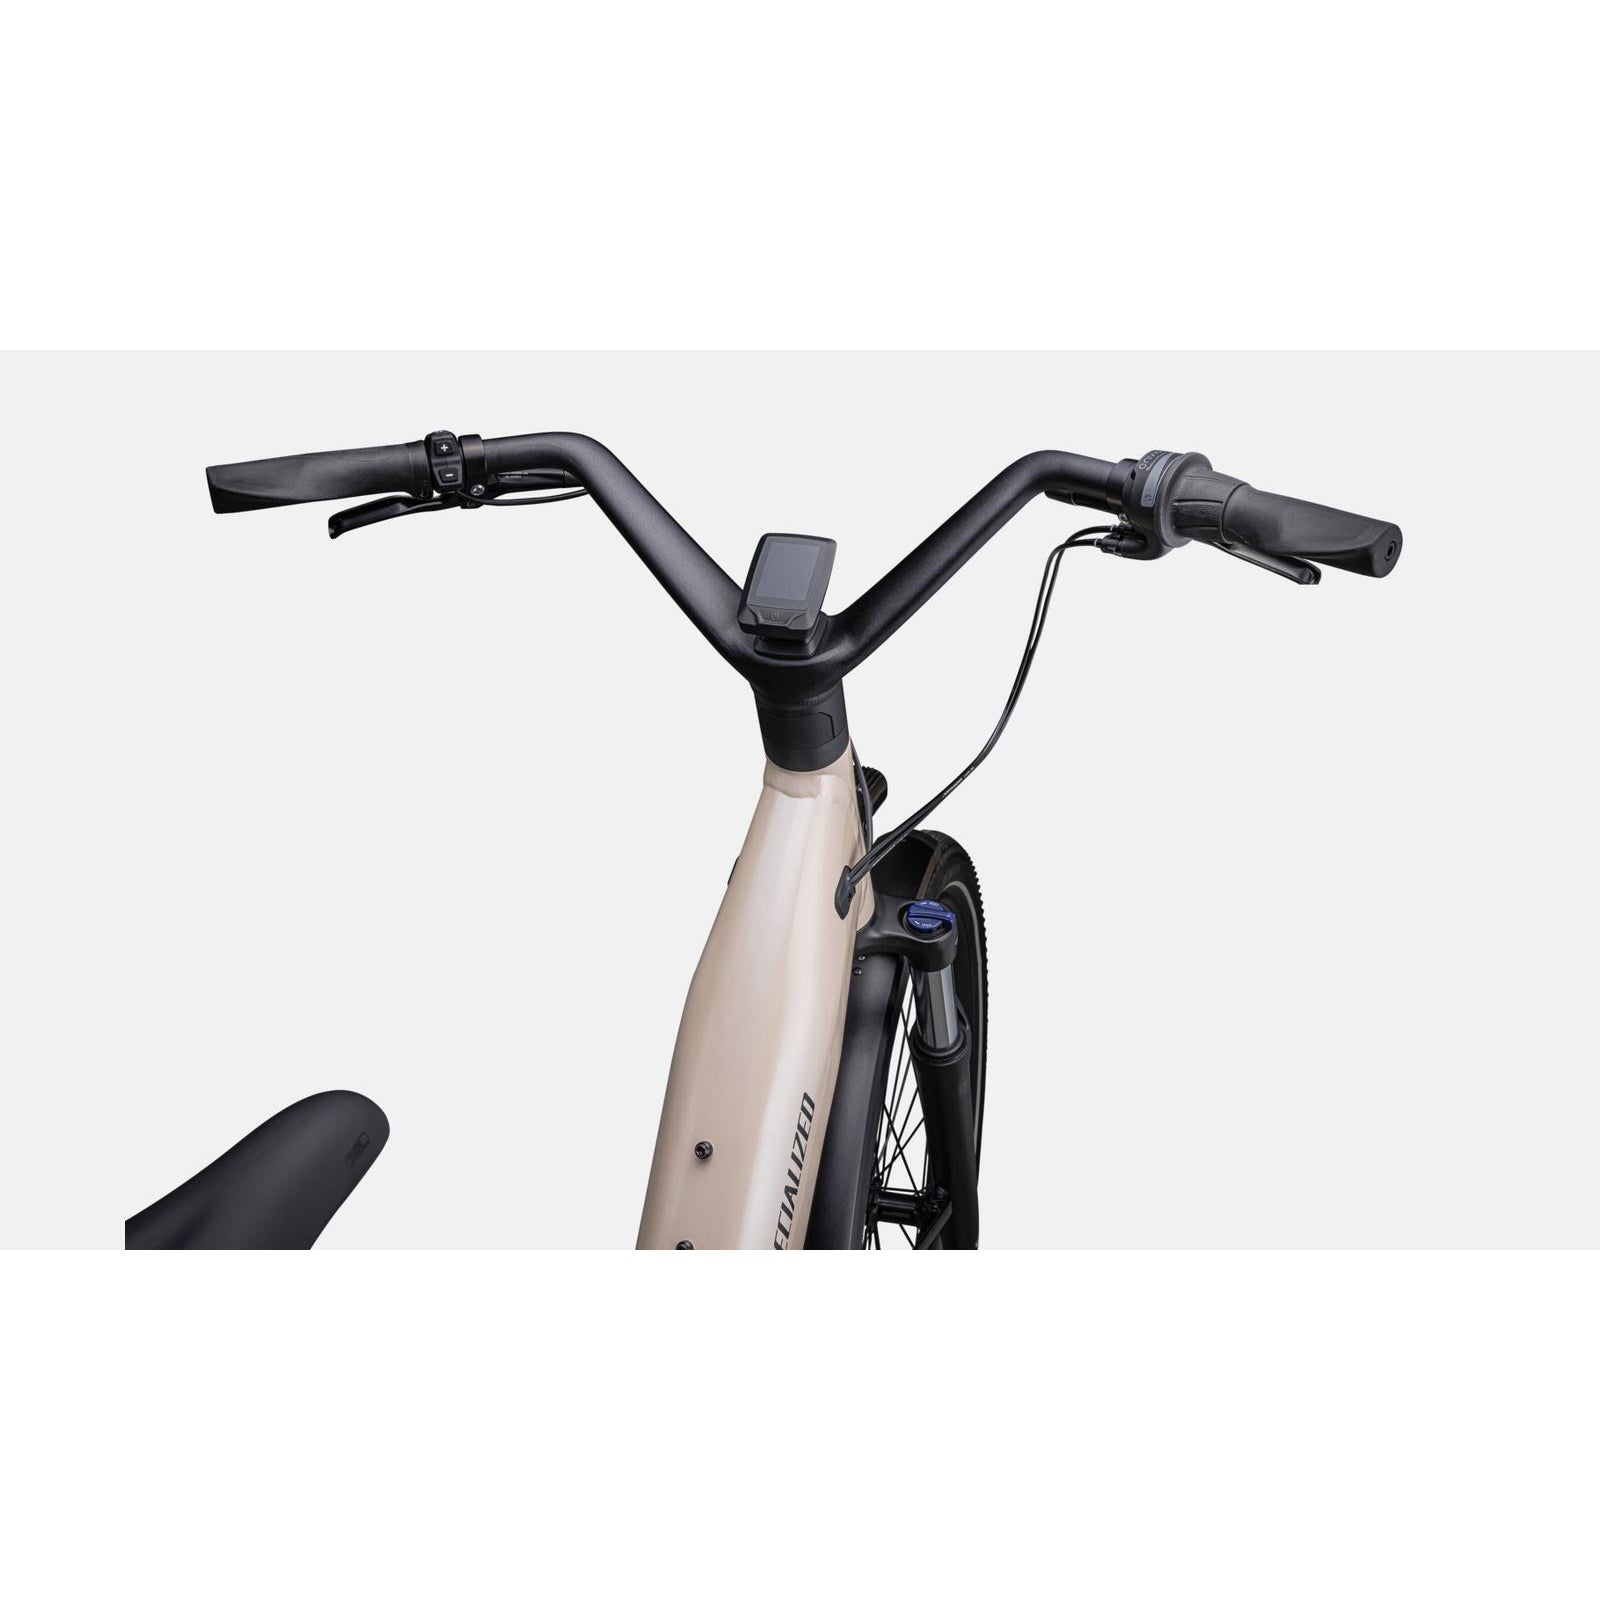 Specialized Turbo Como 3.0 IGH Active Electric Bike (2023) - Bikes - Bicycle Warehouse